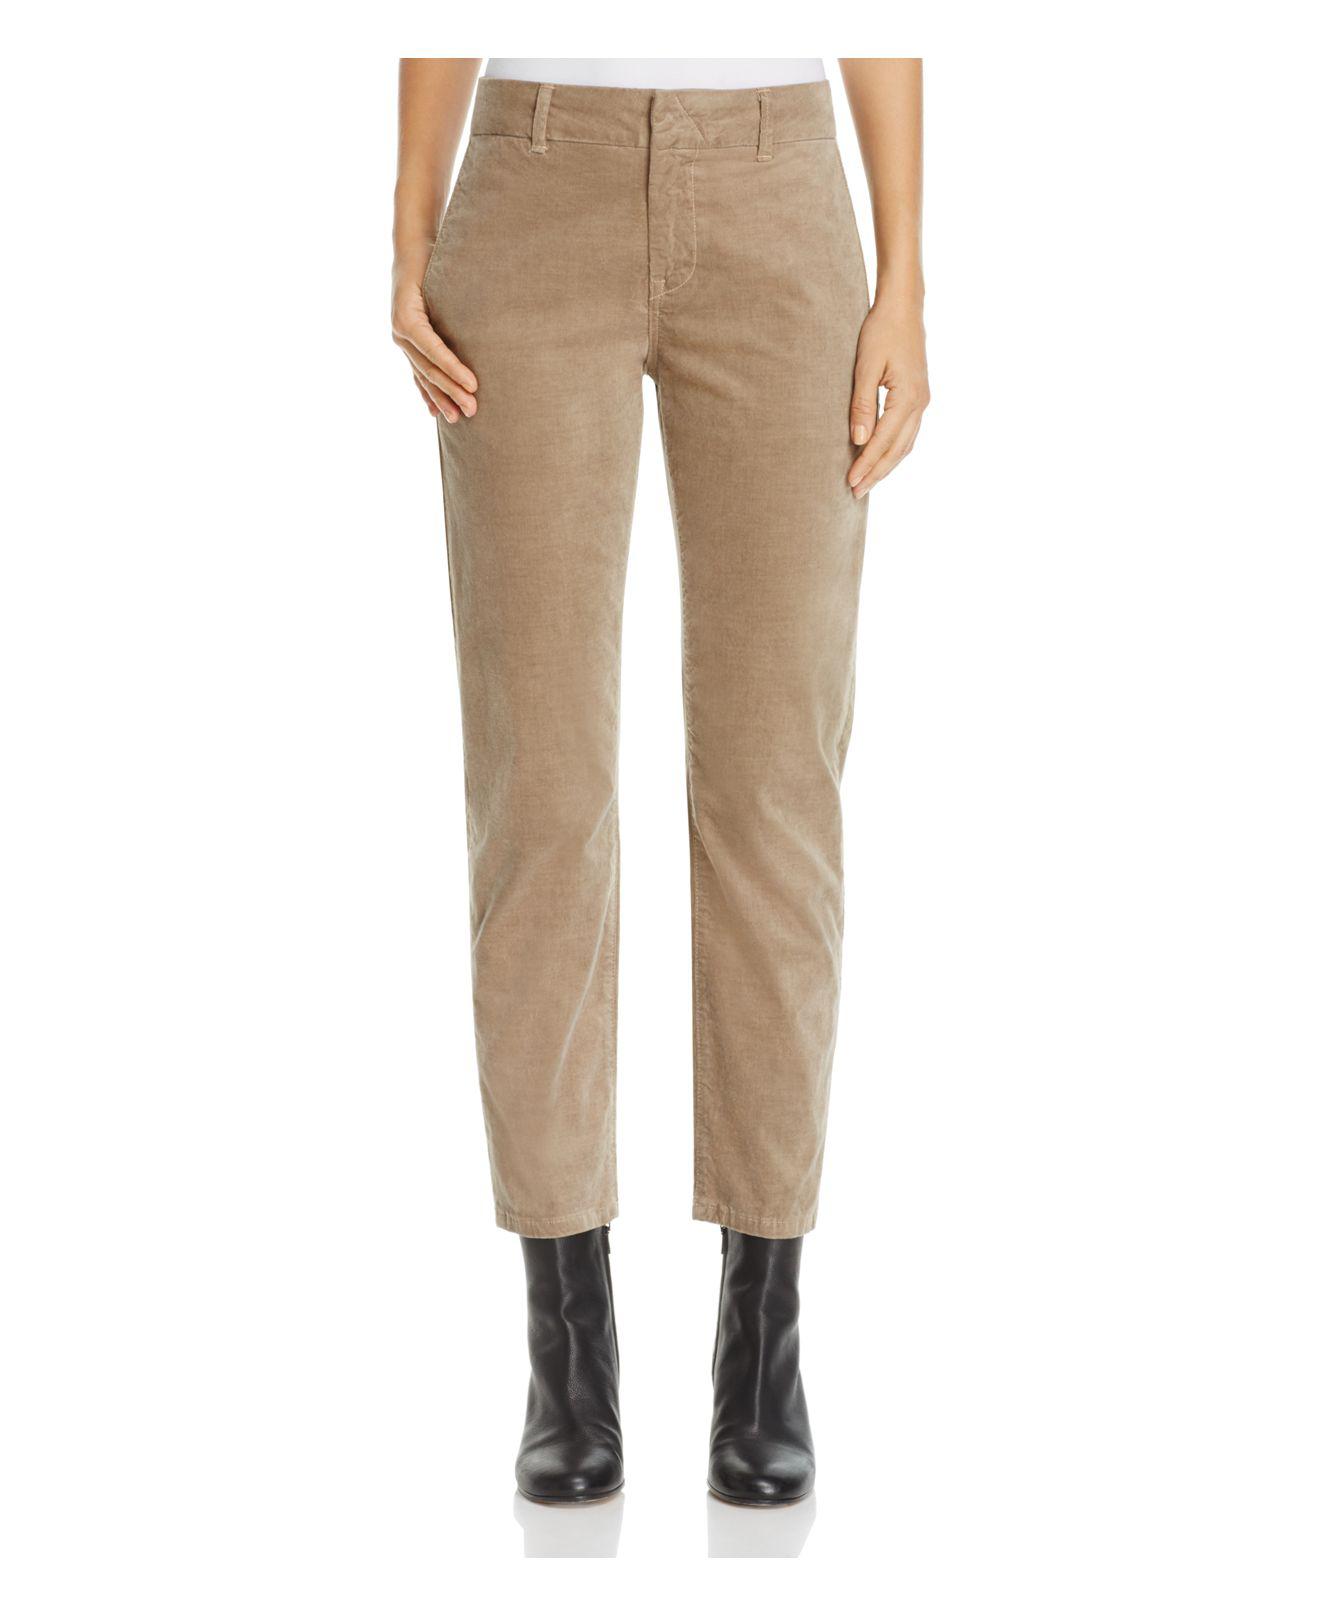 Lyst - Vince Corduroy Chino Pants in Natural